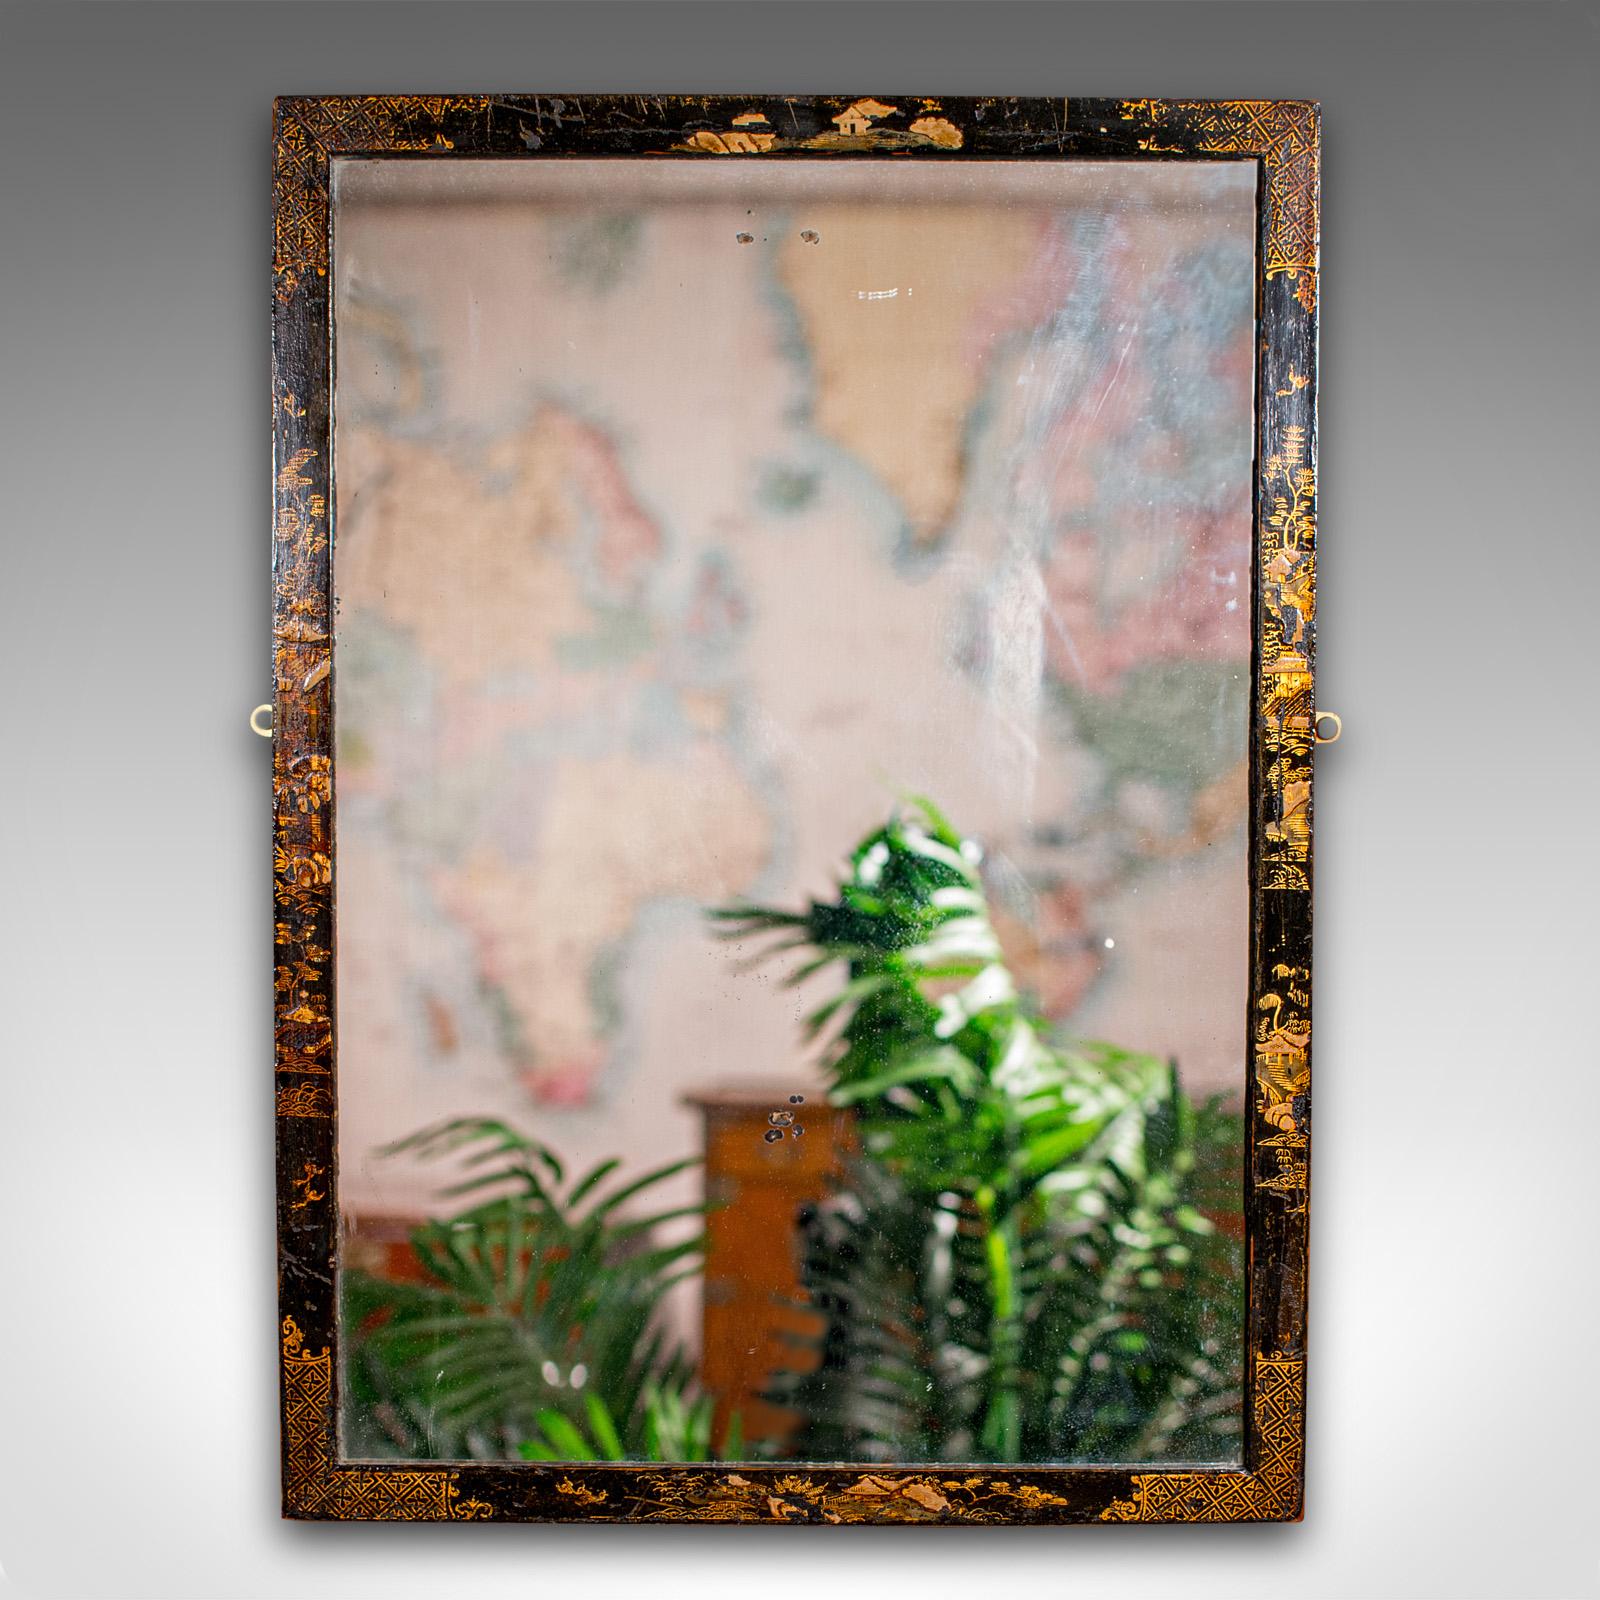 This is an antique Chinoiserie wall mirror. An Oriental, Japanned pine hallway or bedroom mirror, dating to the Victorian period, circa 1880.

Fascinating decorative frame with appealing details
Displaying a desirable aged patina, minor losses under